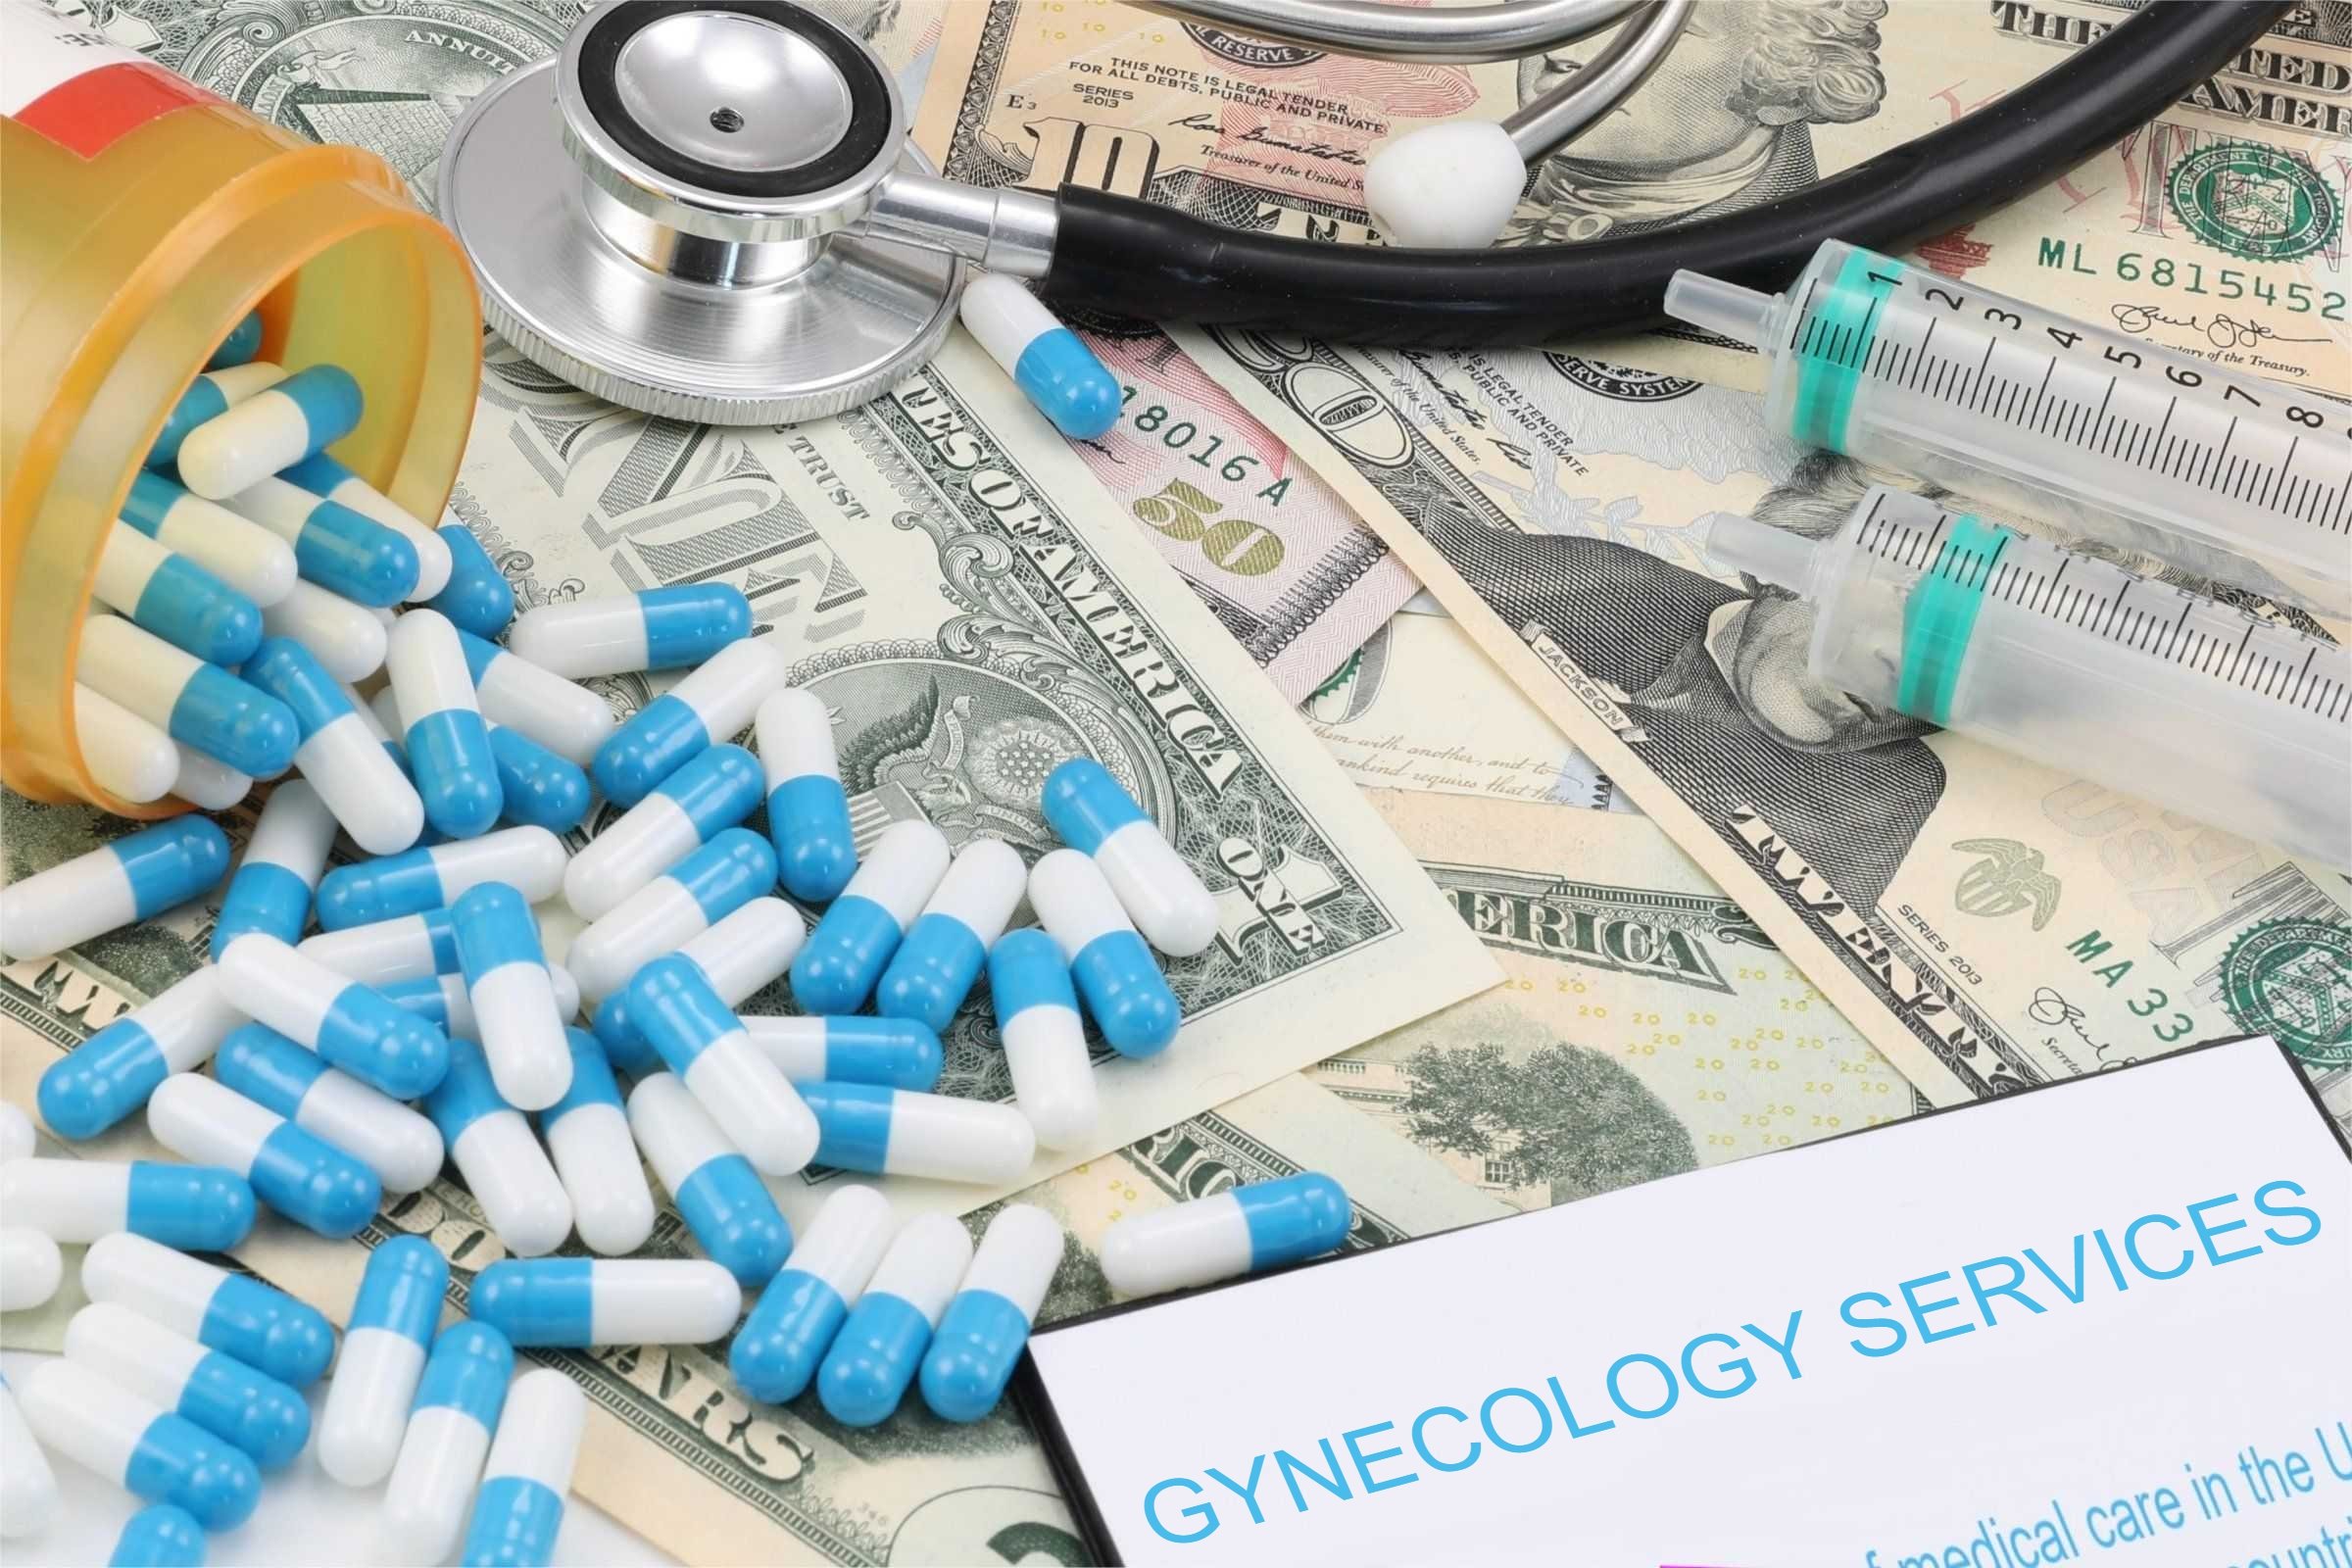 gynecology services